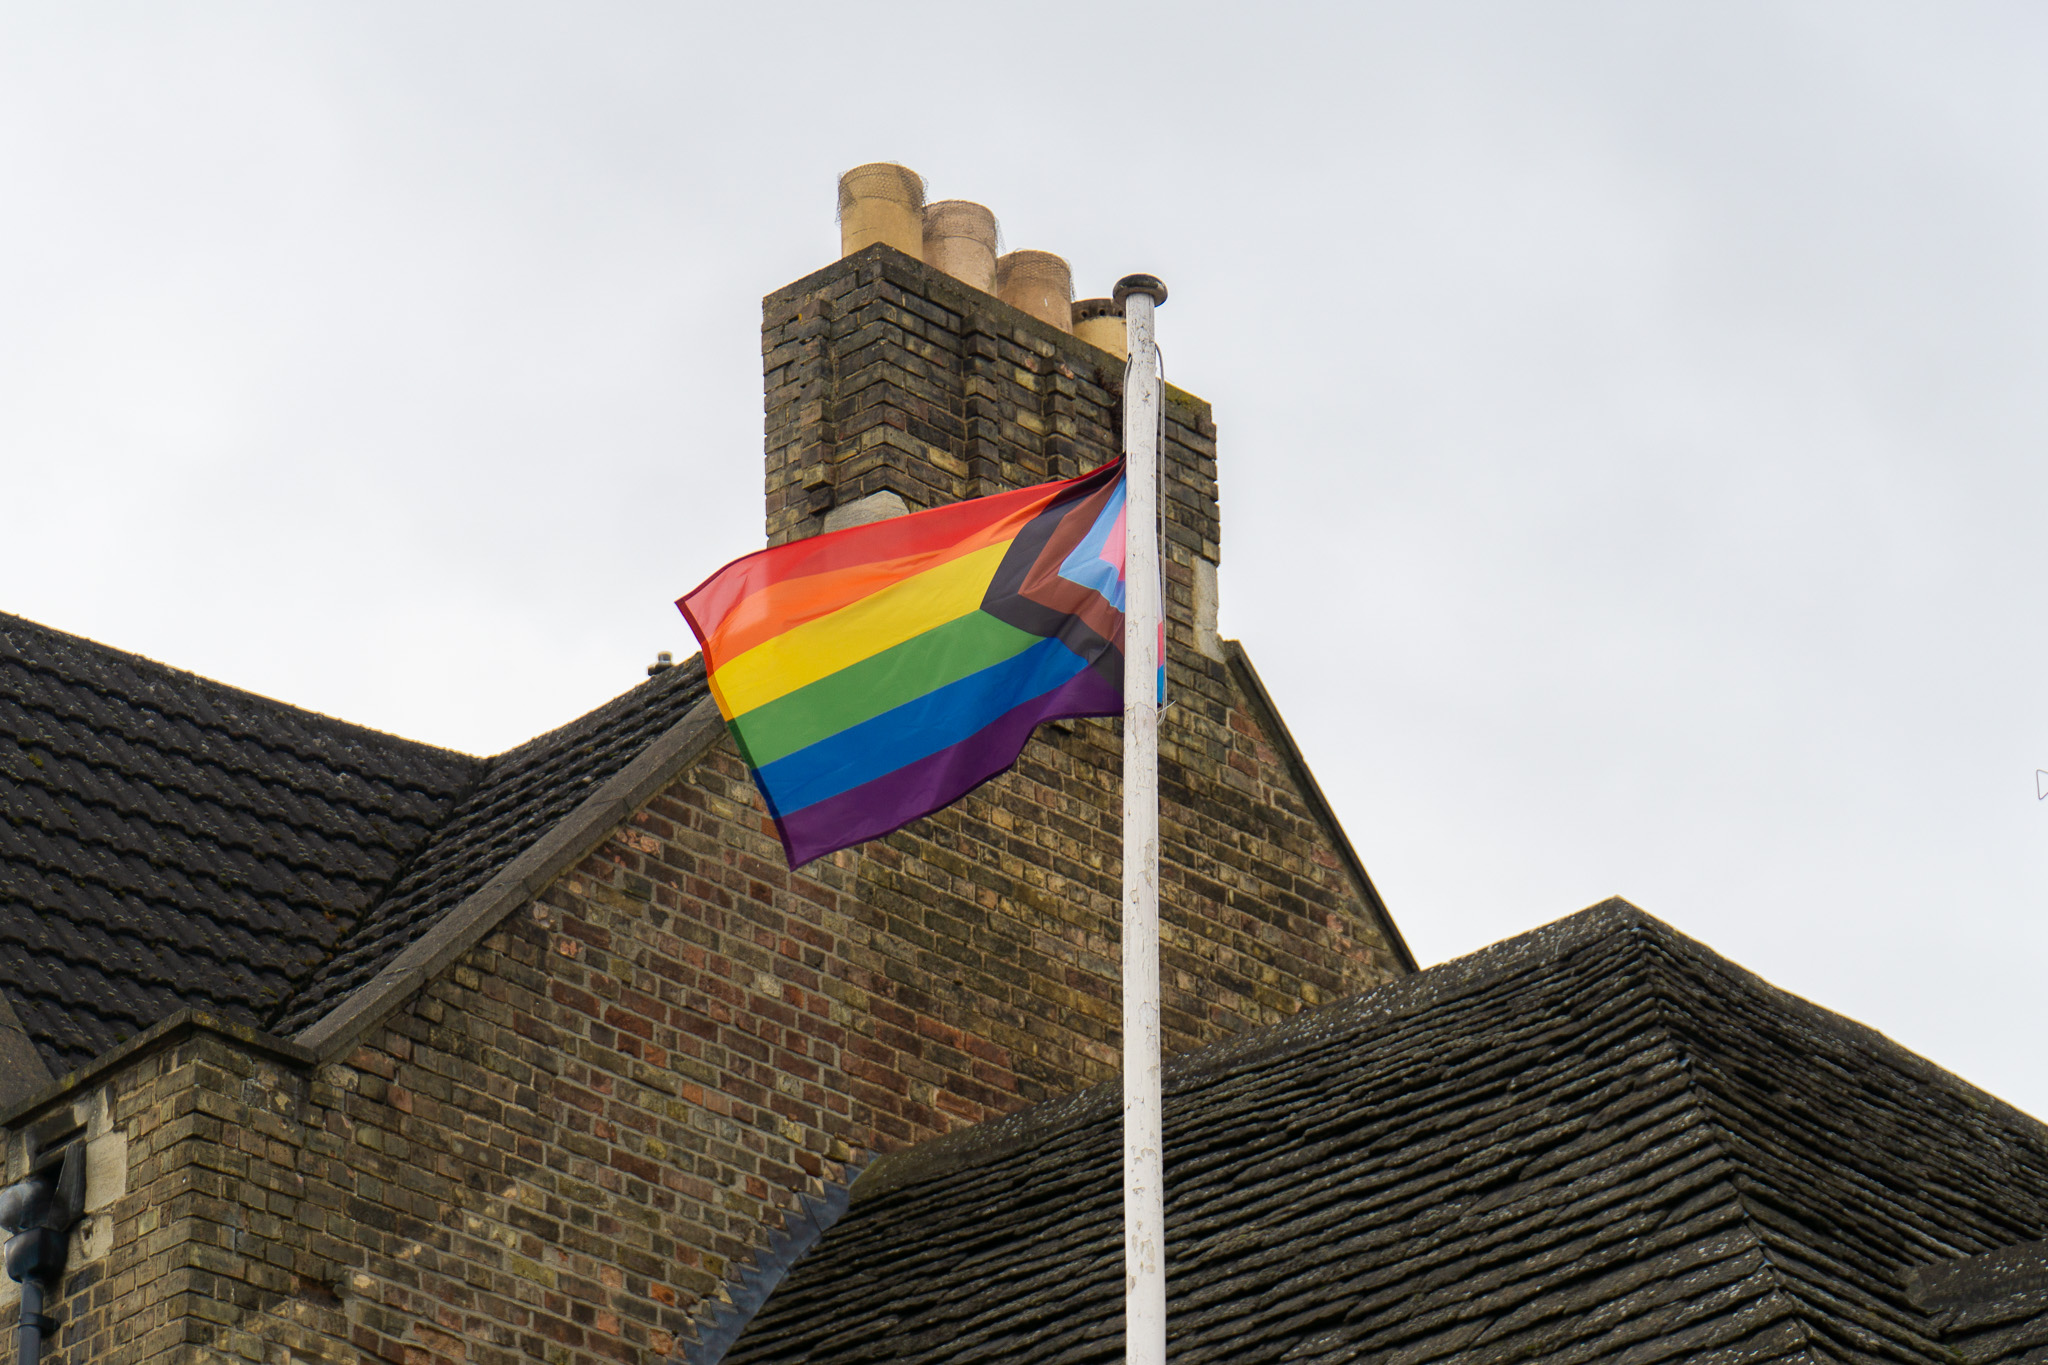 The Progress flag flew above the college in February to mark LGBTQ+ History Month. We also published a series of reflections on our website to celebrate the occasion.